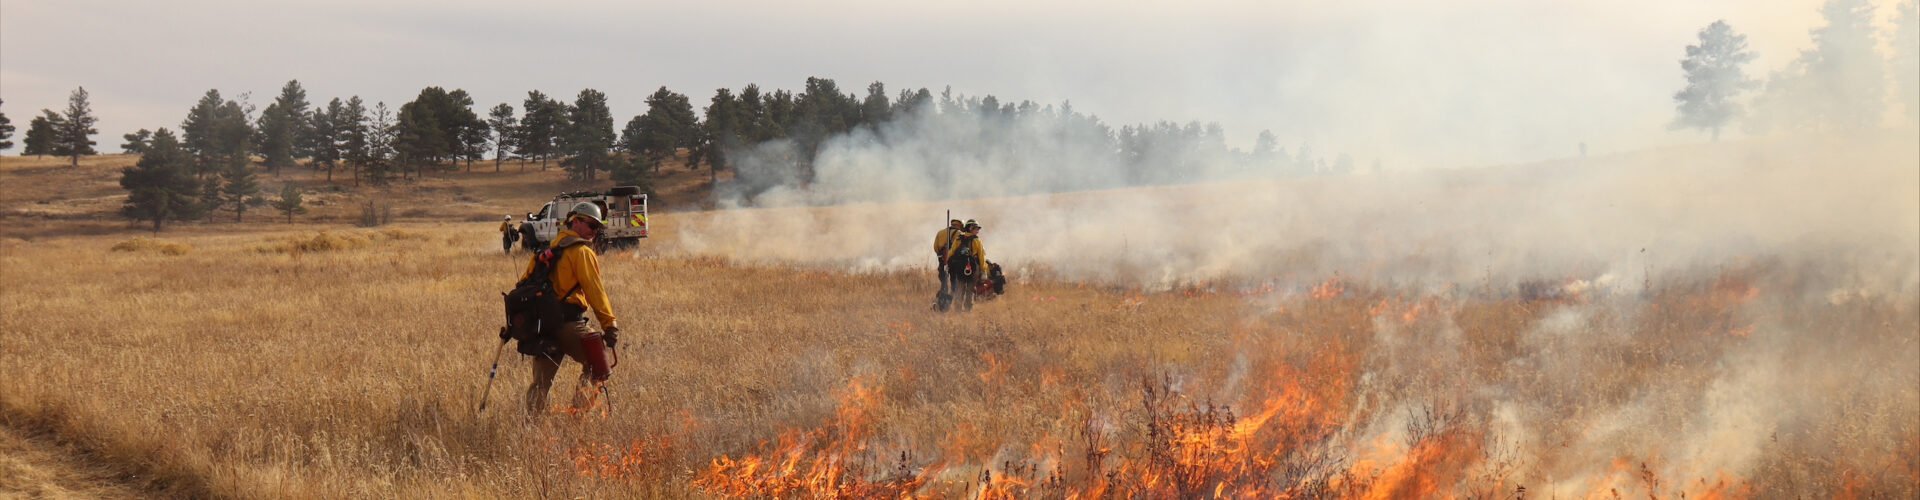 Photo of fireman performing a prescribed burn in a field for purposes of wildfire mitigation.